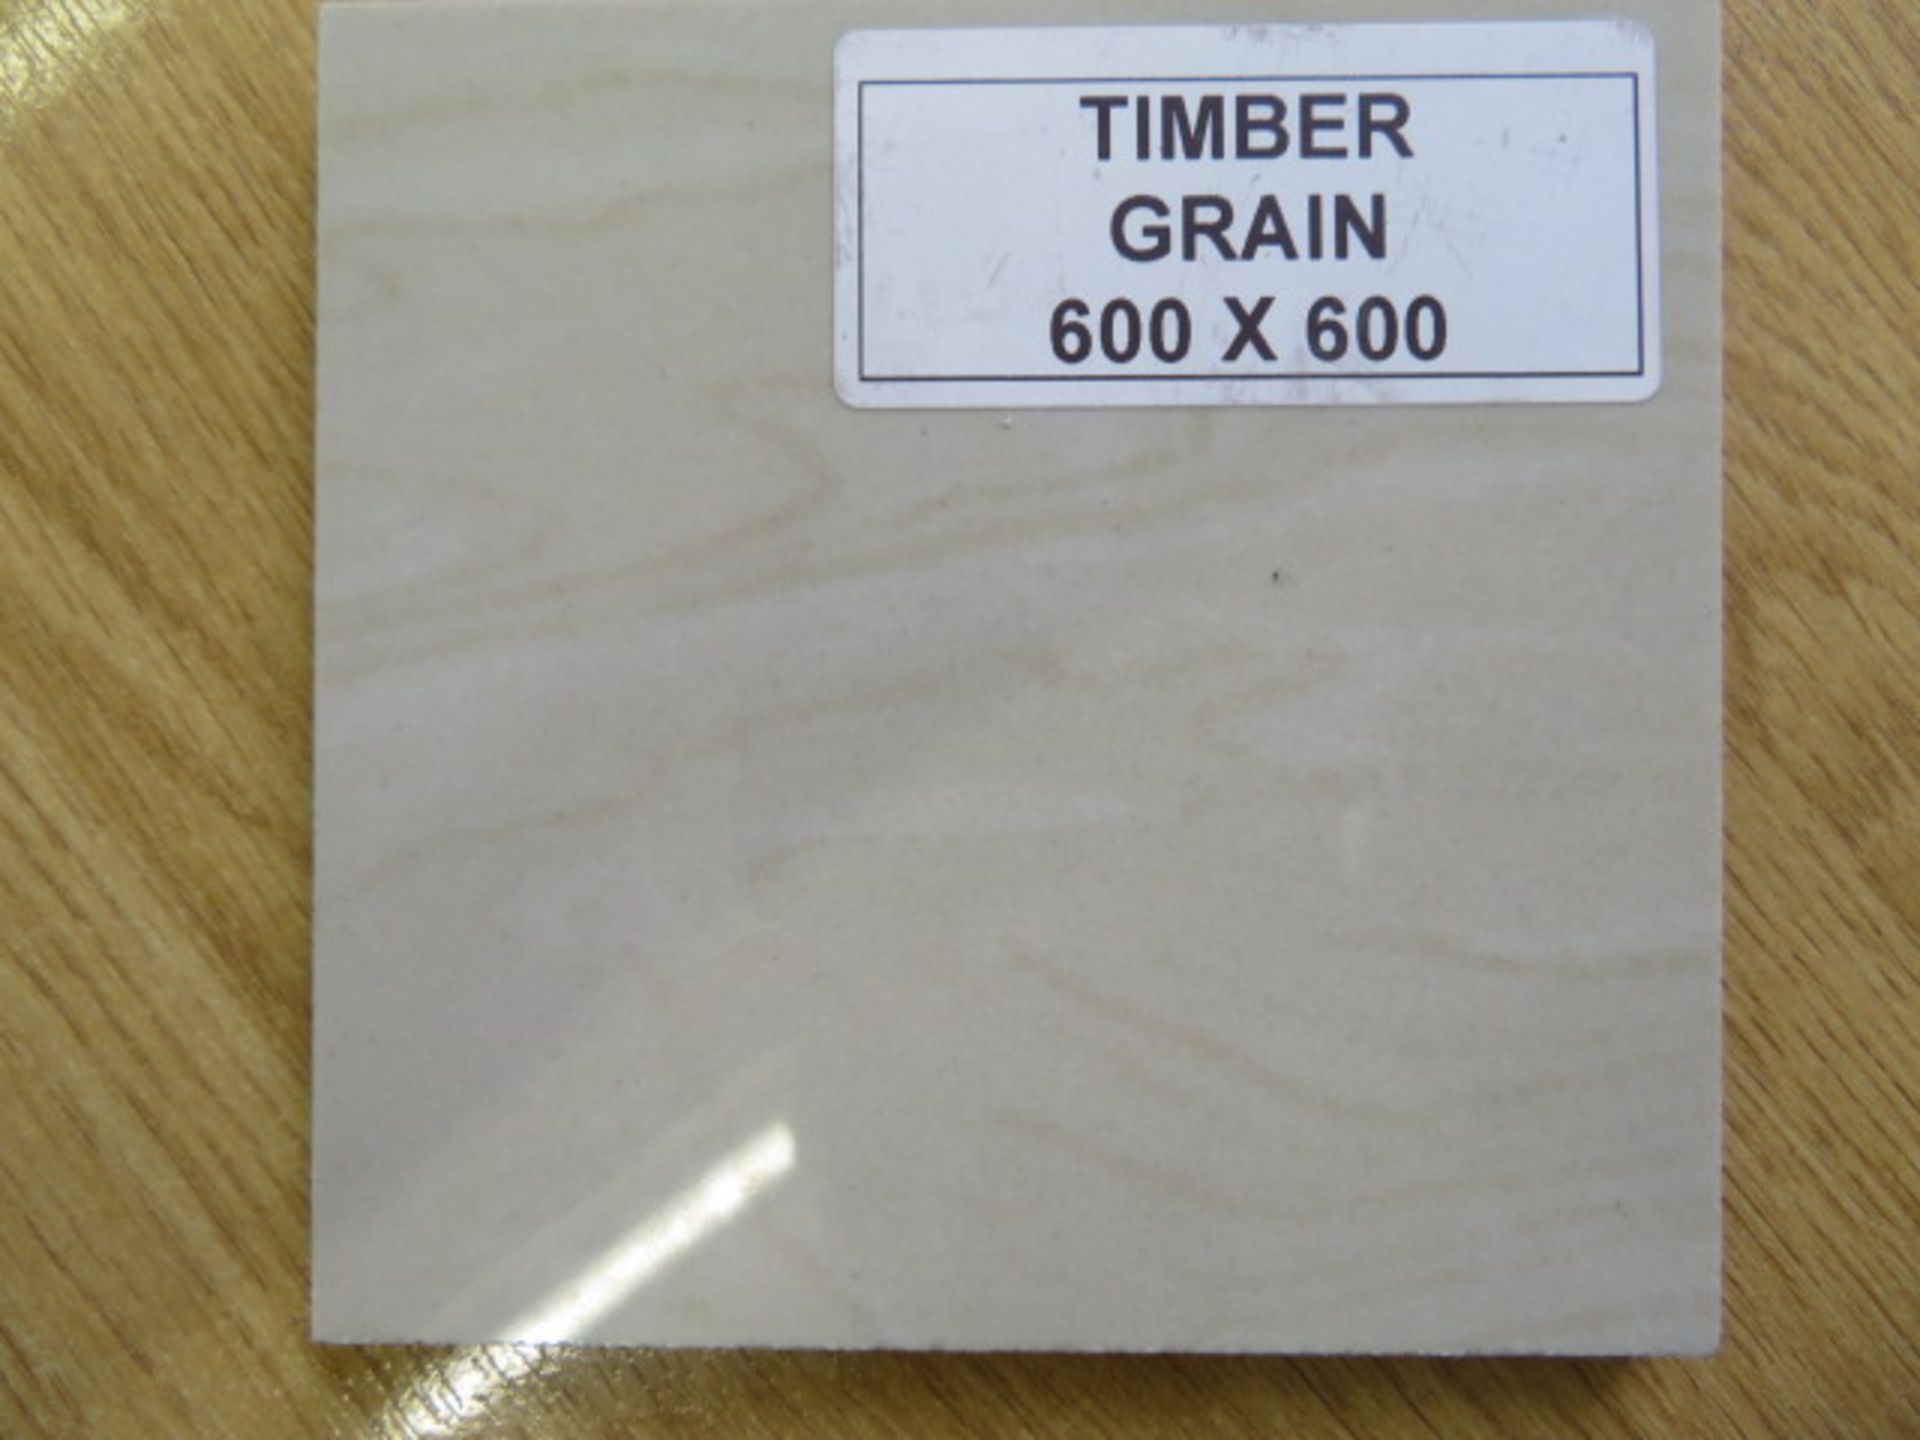 NEW 7.22 Square Meters of Timber Grain Wall and Floor Tiles. 600x600mm per tile. 10mm thick. ... - Image 2 of 3